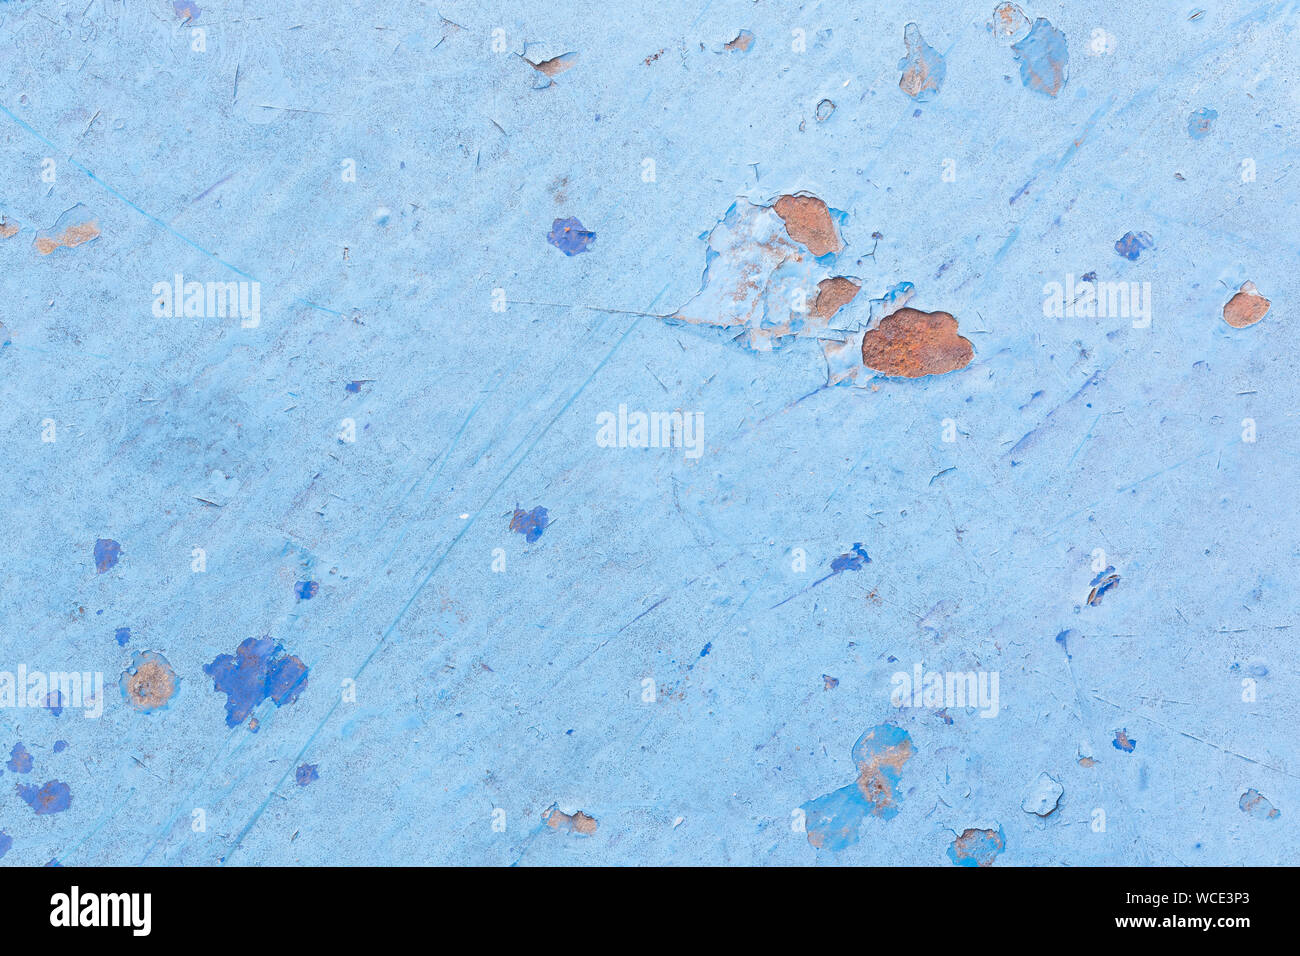 Close-up of a weathered and worn sheet metal plate painted in light blue. Paint is partly peeled off revealing rusty metal. Abstract background. Stock Photo